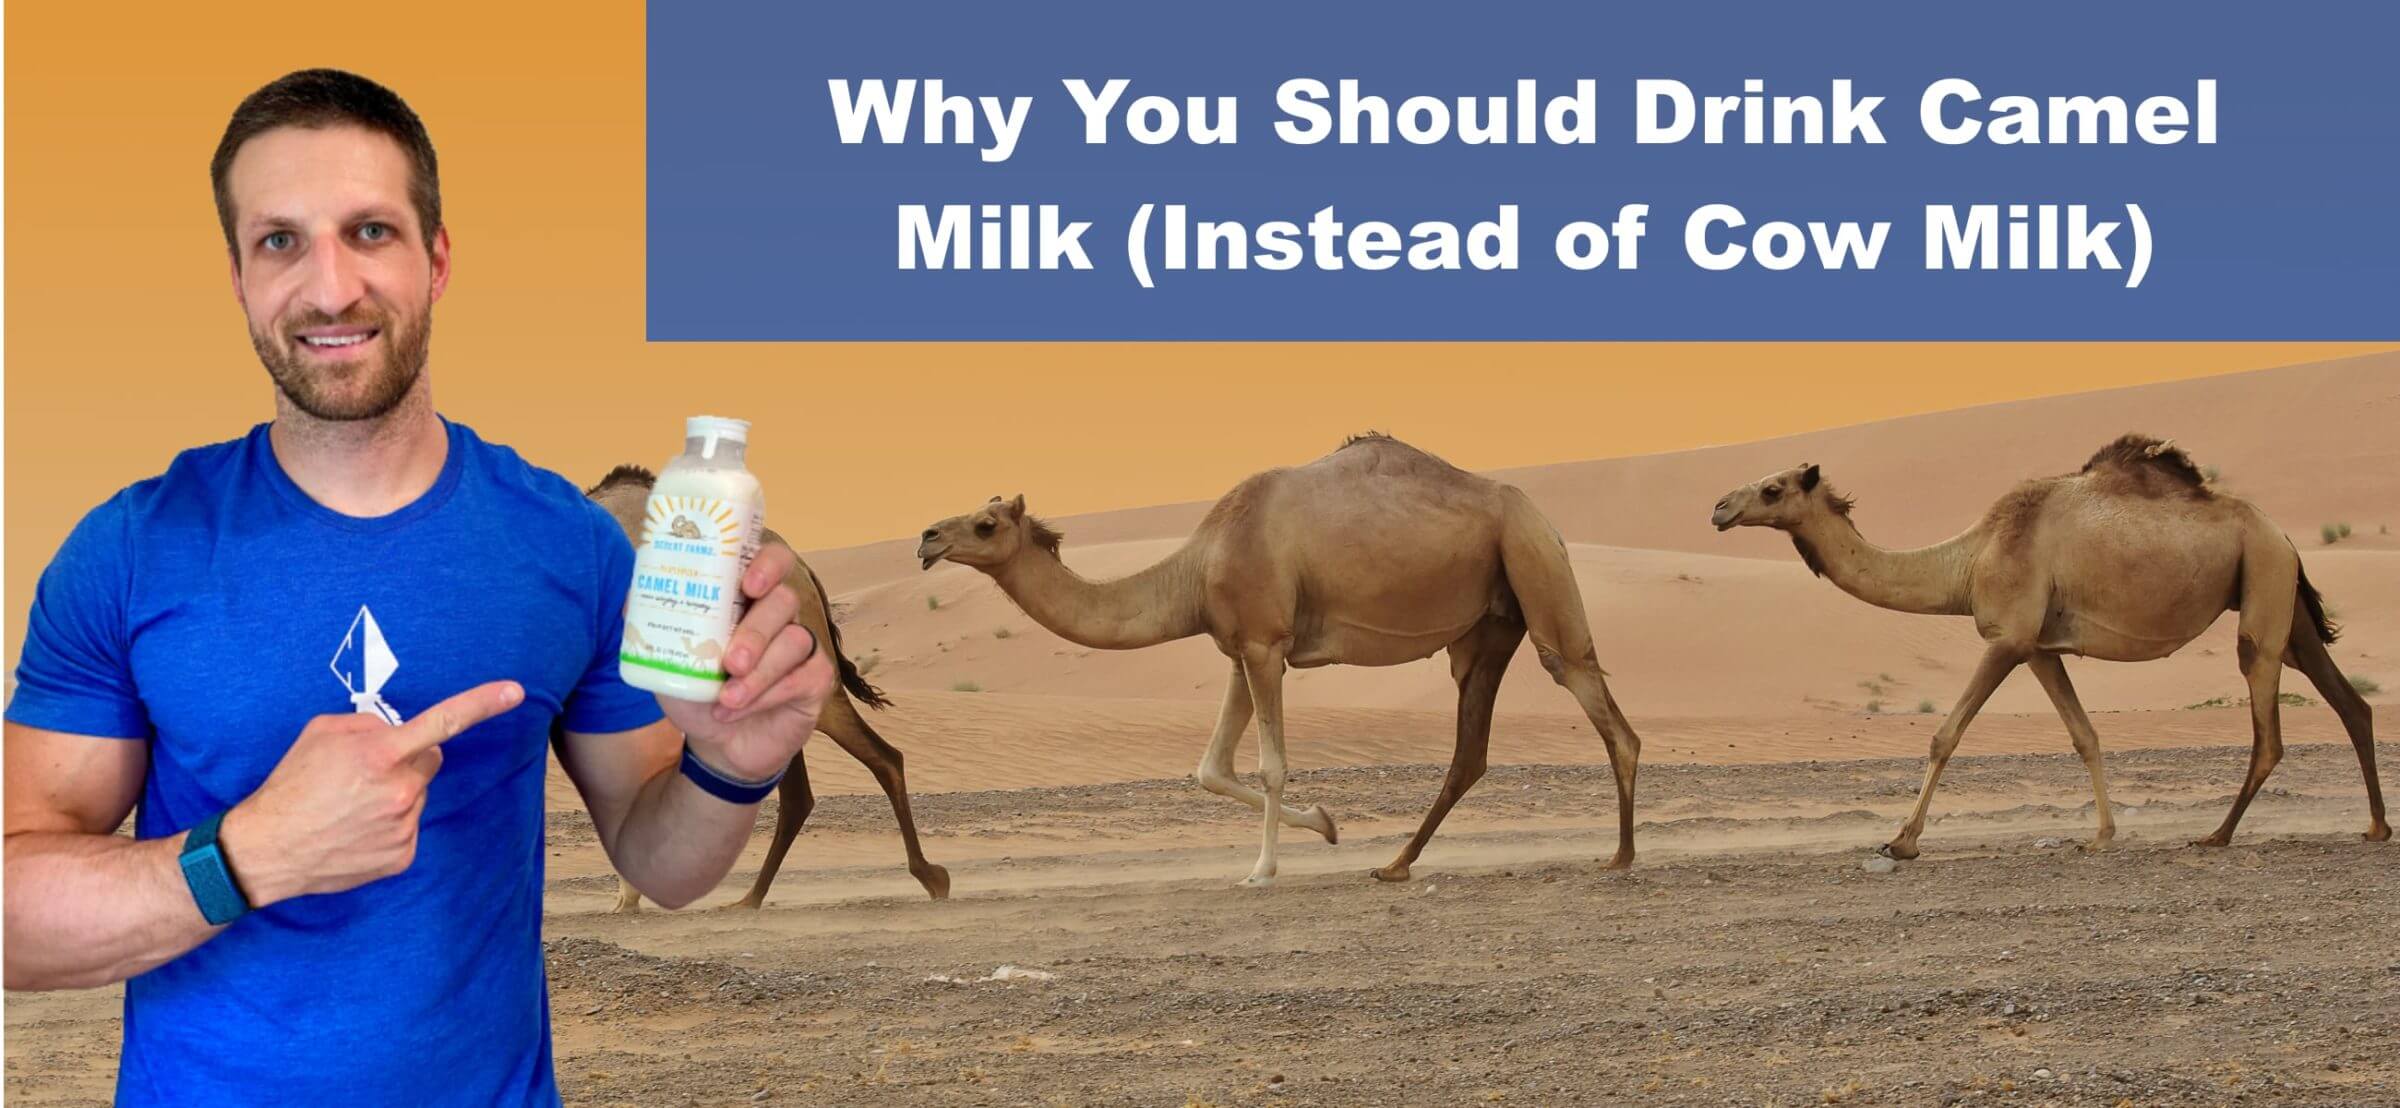 Is Camel Milk Really Healthier Than Cow Milk?